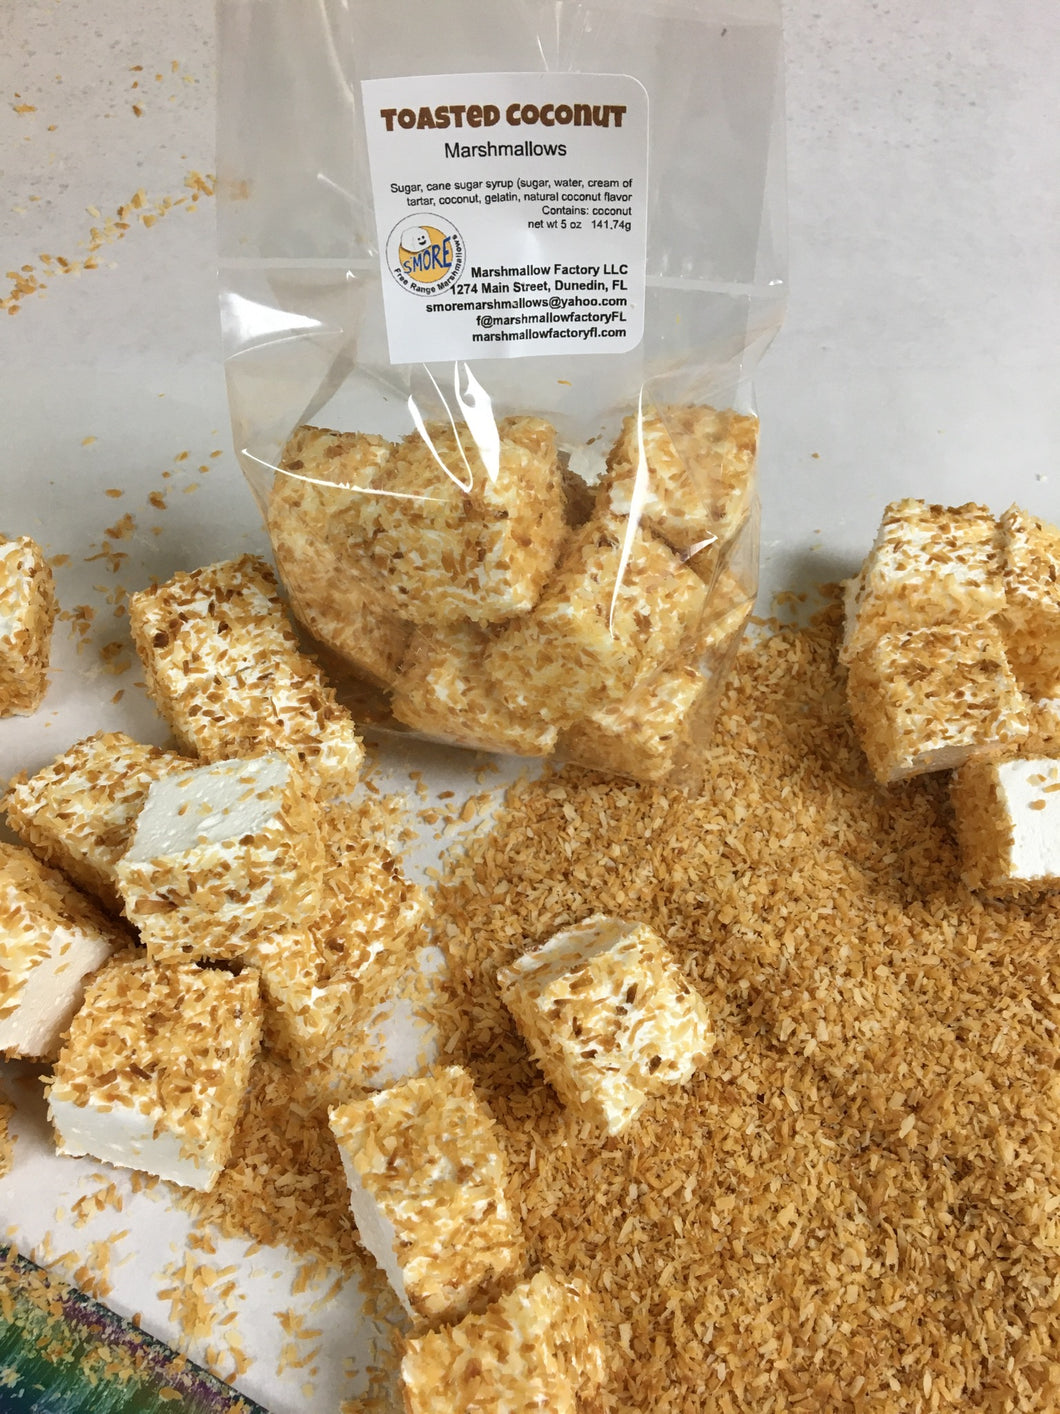 Toasted Coconut - Marshmallow Flavor